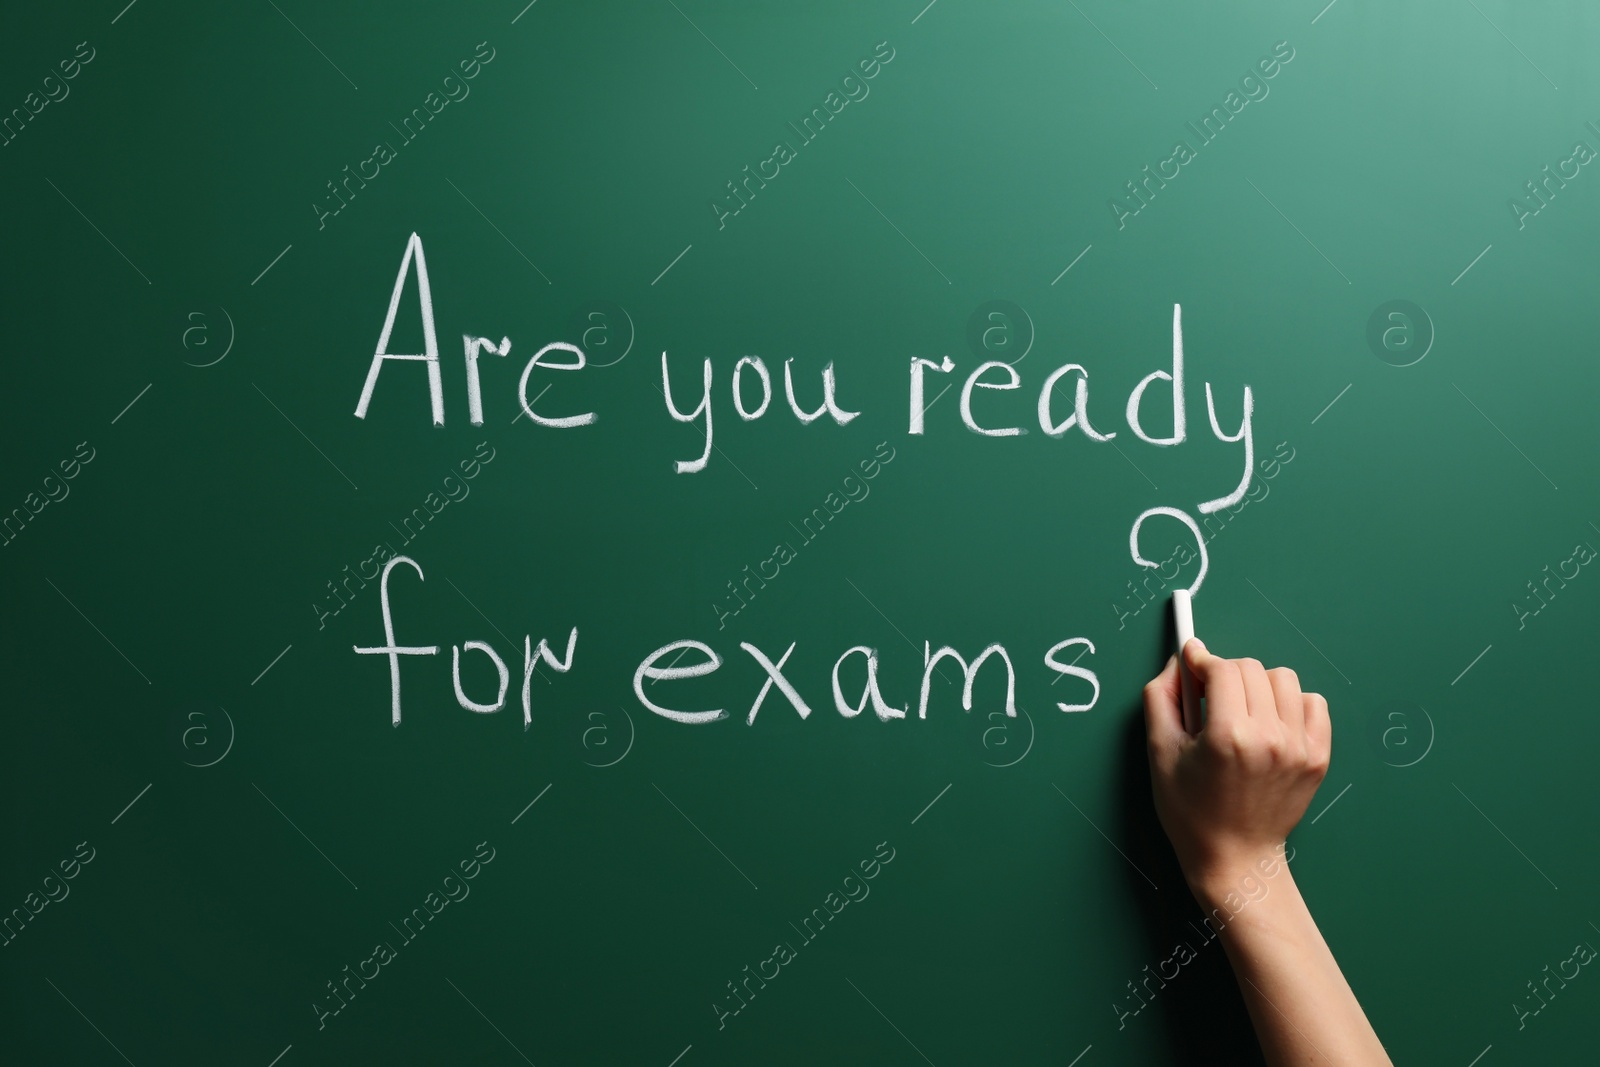 Photo of Woman writing phrase Are You Ready For Exams on green chalkboard, closeup